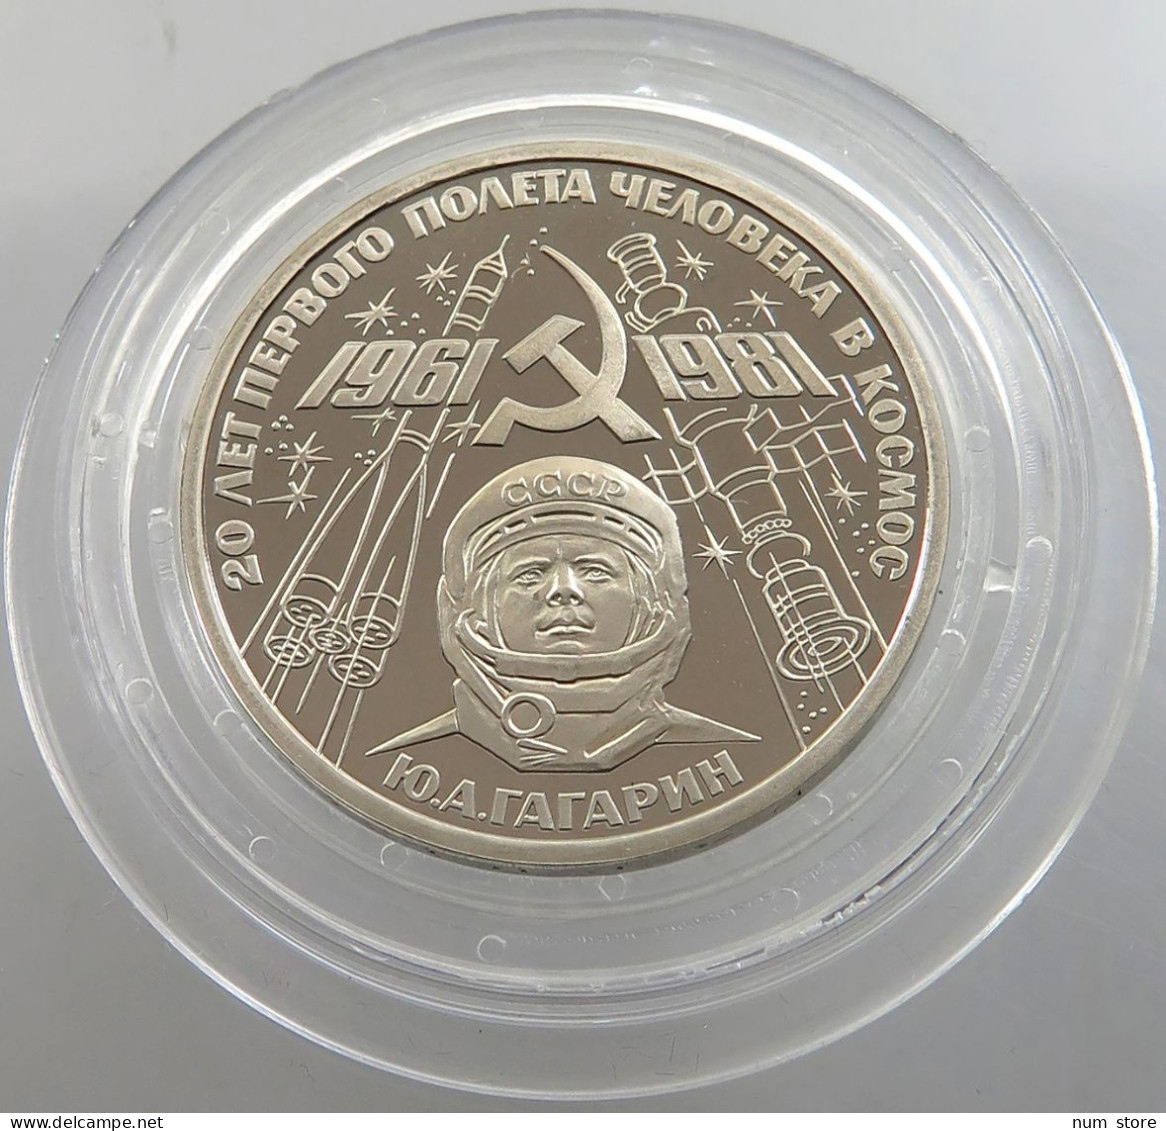 RUSSIA USSR ROUBLE 1981 1988 GAGARIN PROOF #sm14 0345 - Russland